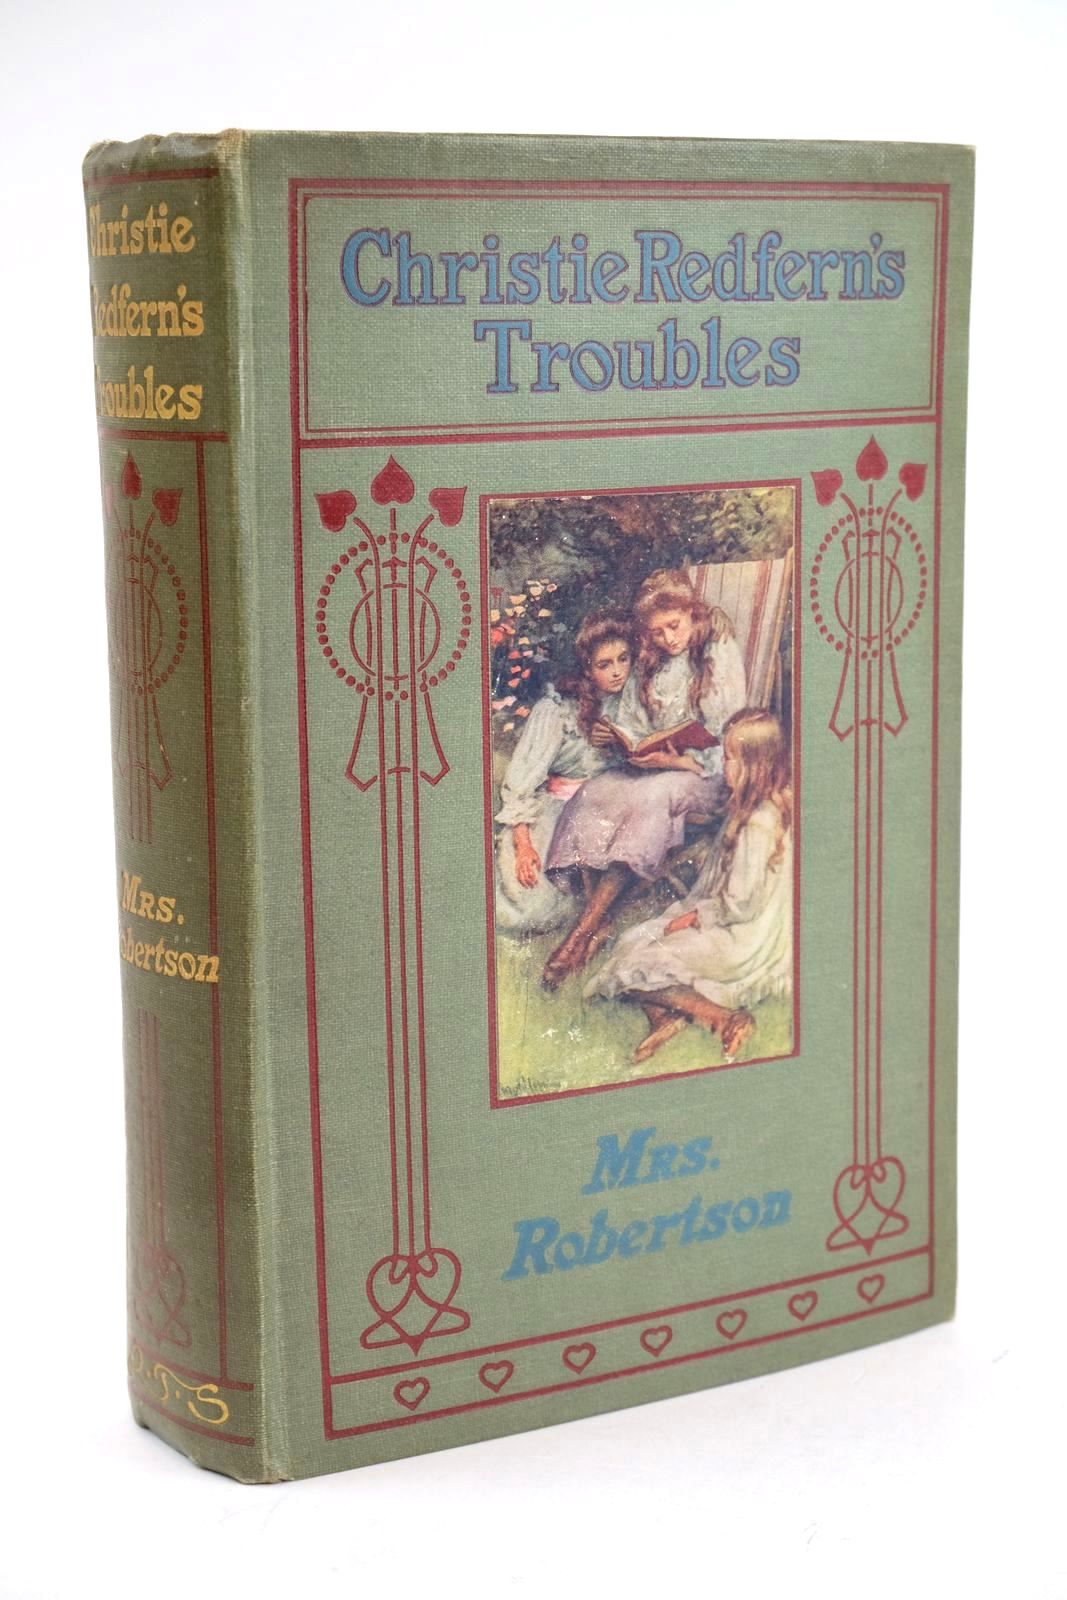 Photo of CHRISTIE REDFERN'S TROUBLES written by Robertson, Mrs illustrated by Lintott, E. Barnard published by The Religious Tract Society (STOCK CODE: 1324595)  for sale by Stella & Rose's Books